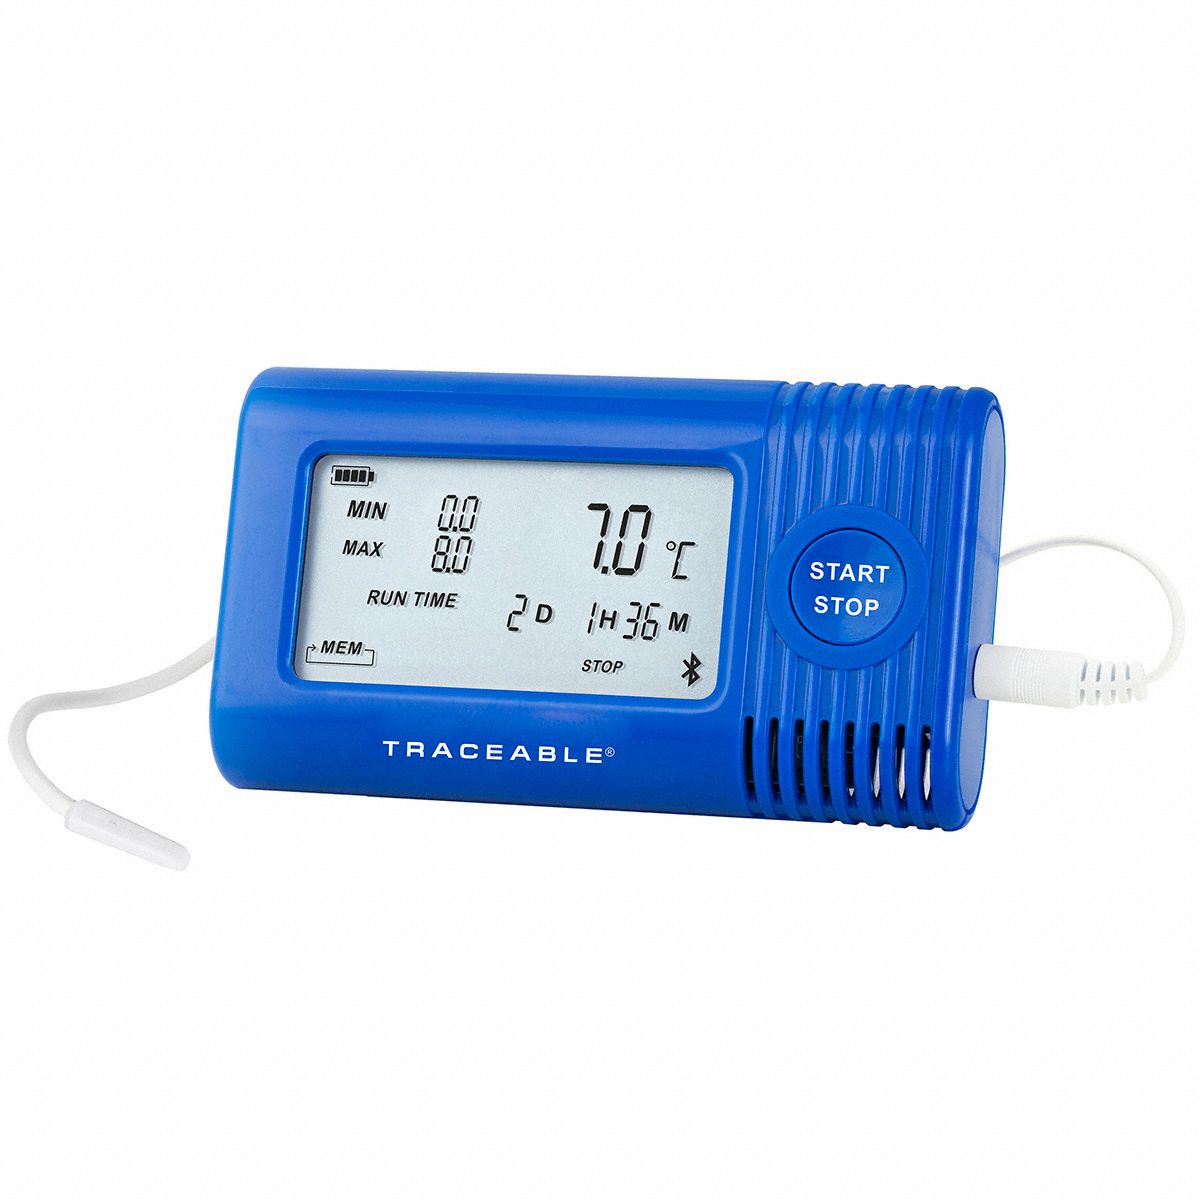 Data Logger: ±0.5°F Accuracy, -58° to 158°F, 6 mo Battery Life, Digital Readout